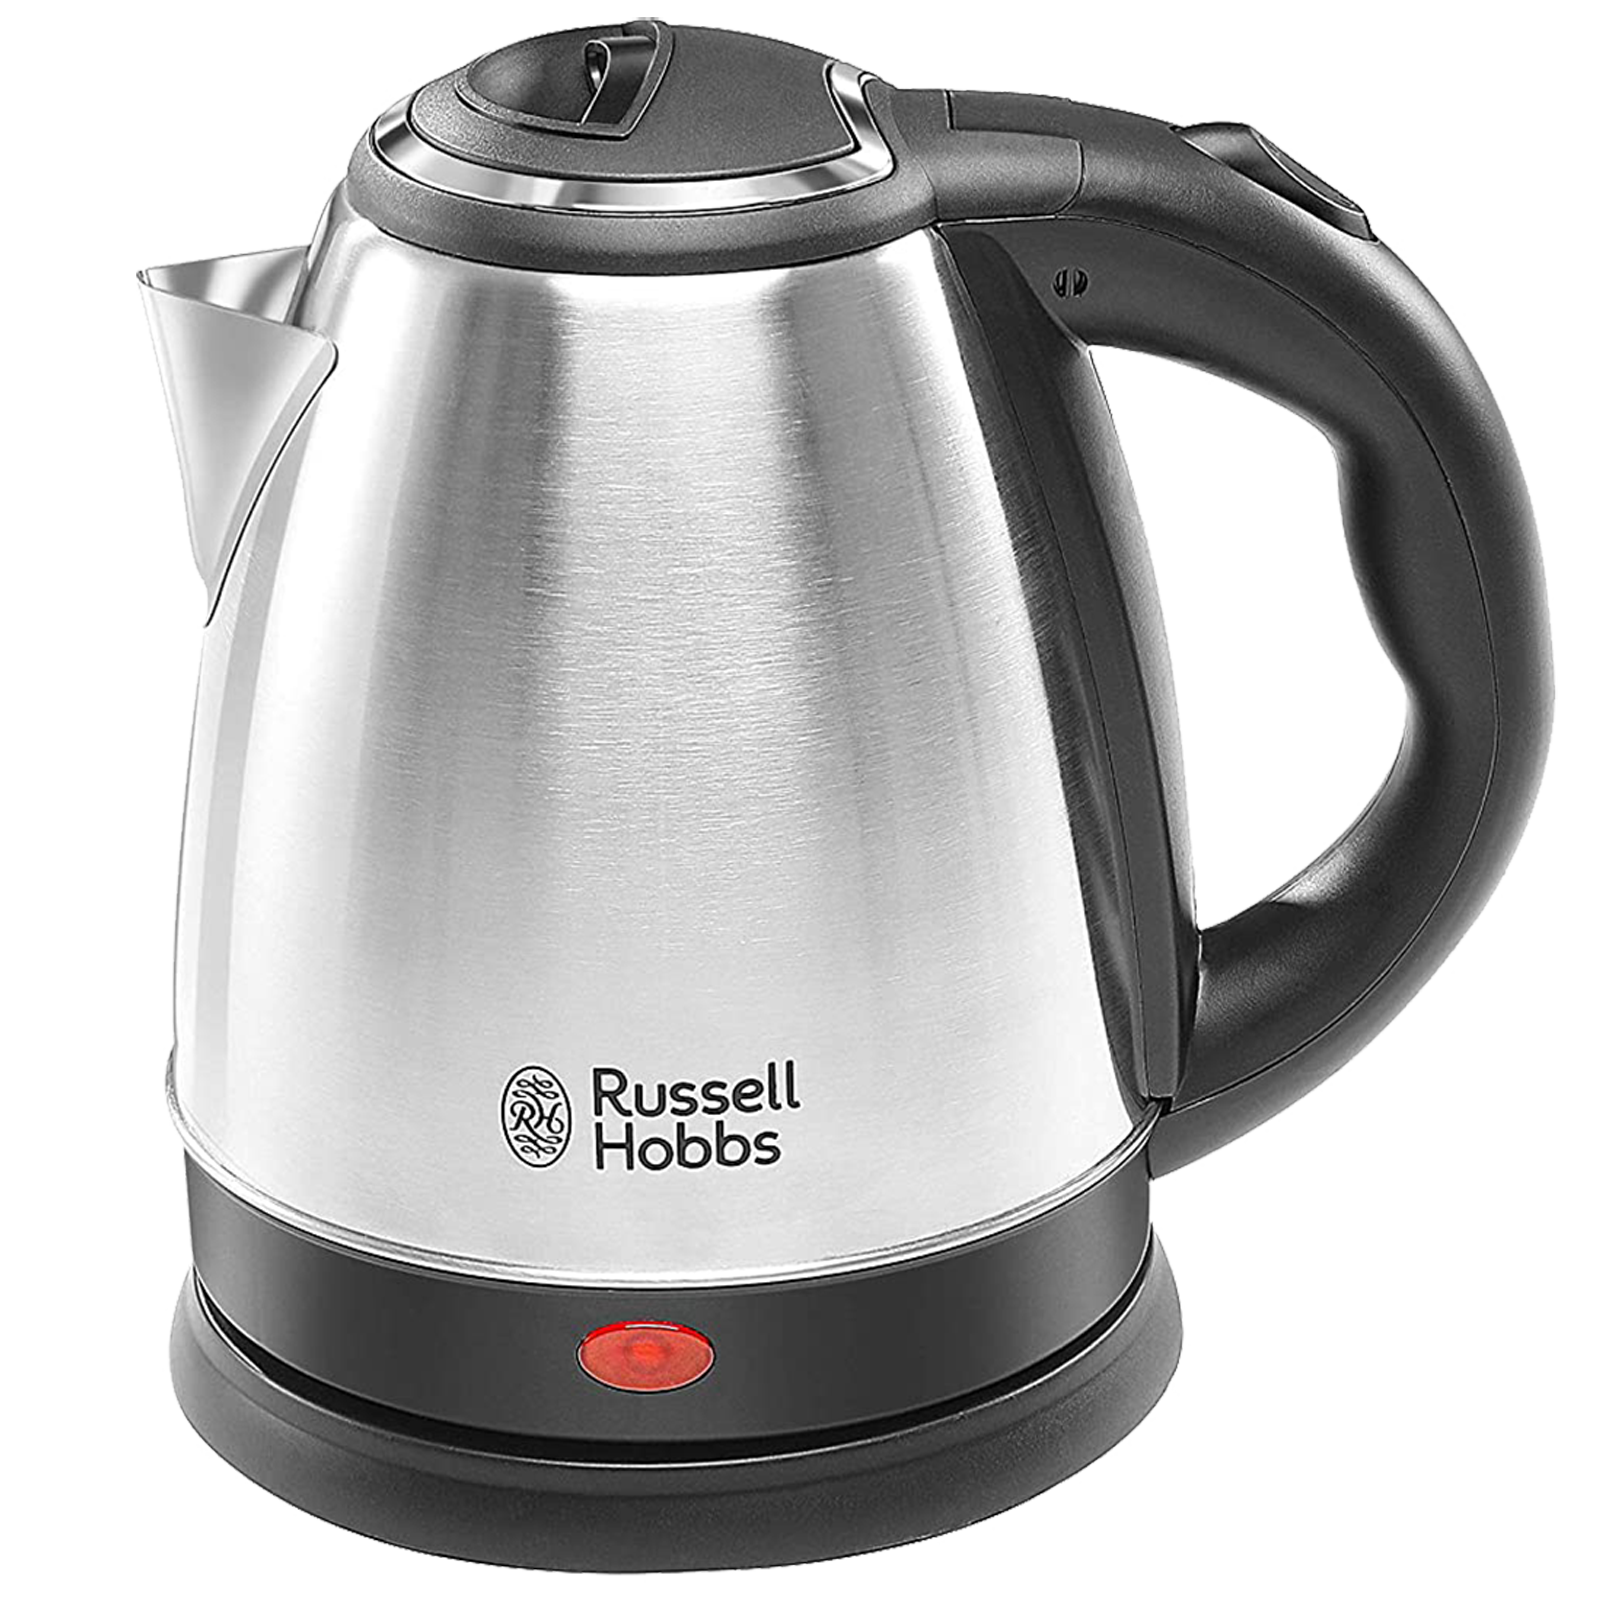 Russell Hobbs 1.5 Litres 1500 Watts Electric Kettle (Detachable Base, 360 Degree Swivel Base, DOME1515, Silver)